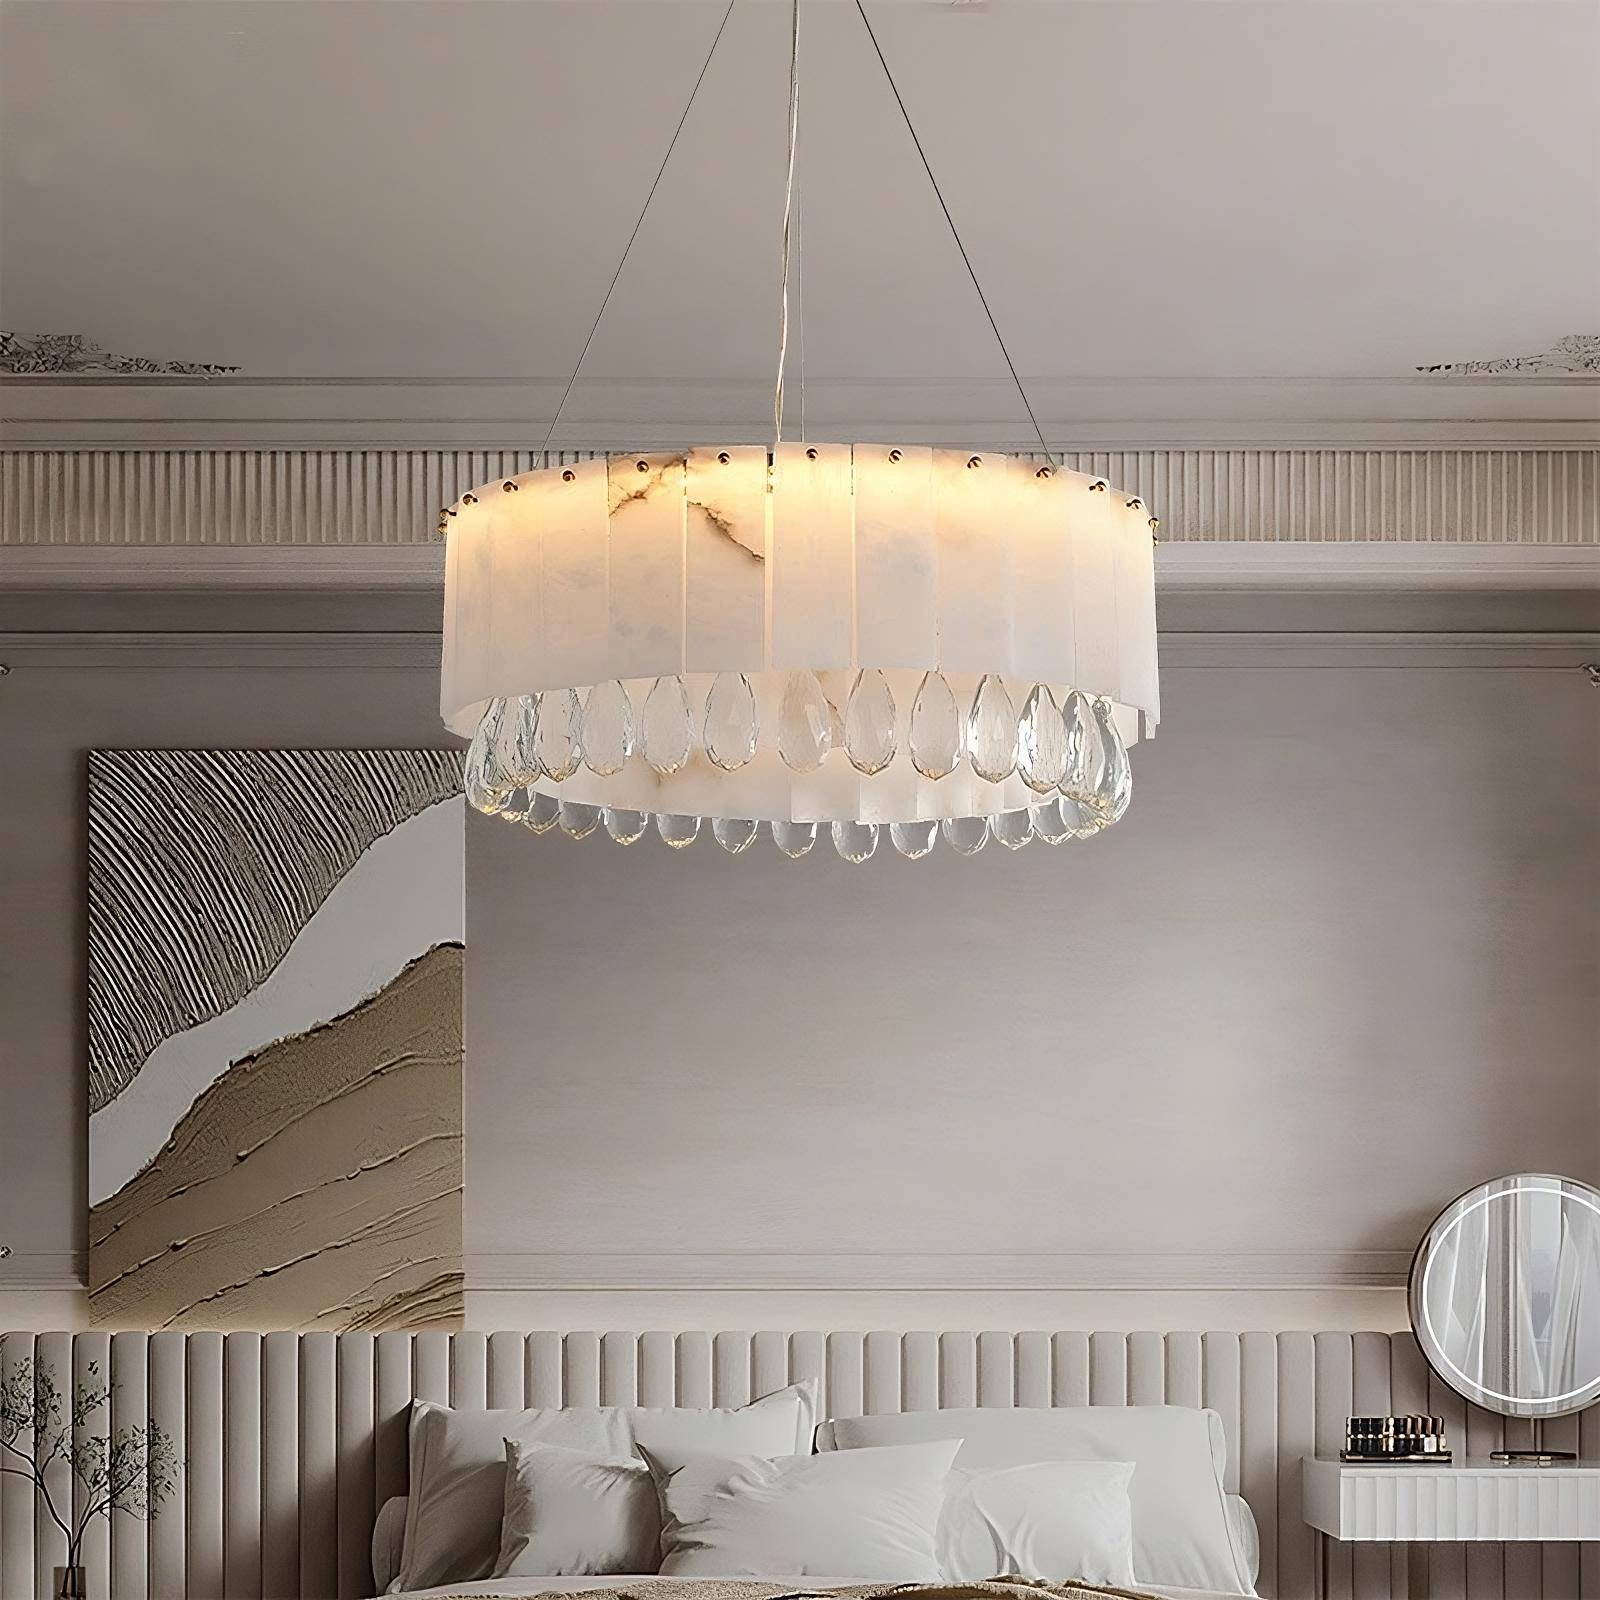 A stylish bedroom features a Modern Crystal and Spanish Marble Chandelier by Morsale.com with hanging crystal ornaments. The room has a neutral color palette with a beige bed, a painting with abstract earth tones above the headboard, and a round mirror on an elegant vanity table in the corner.